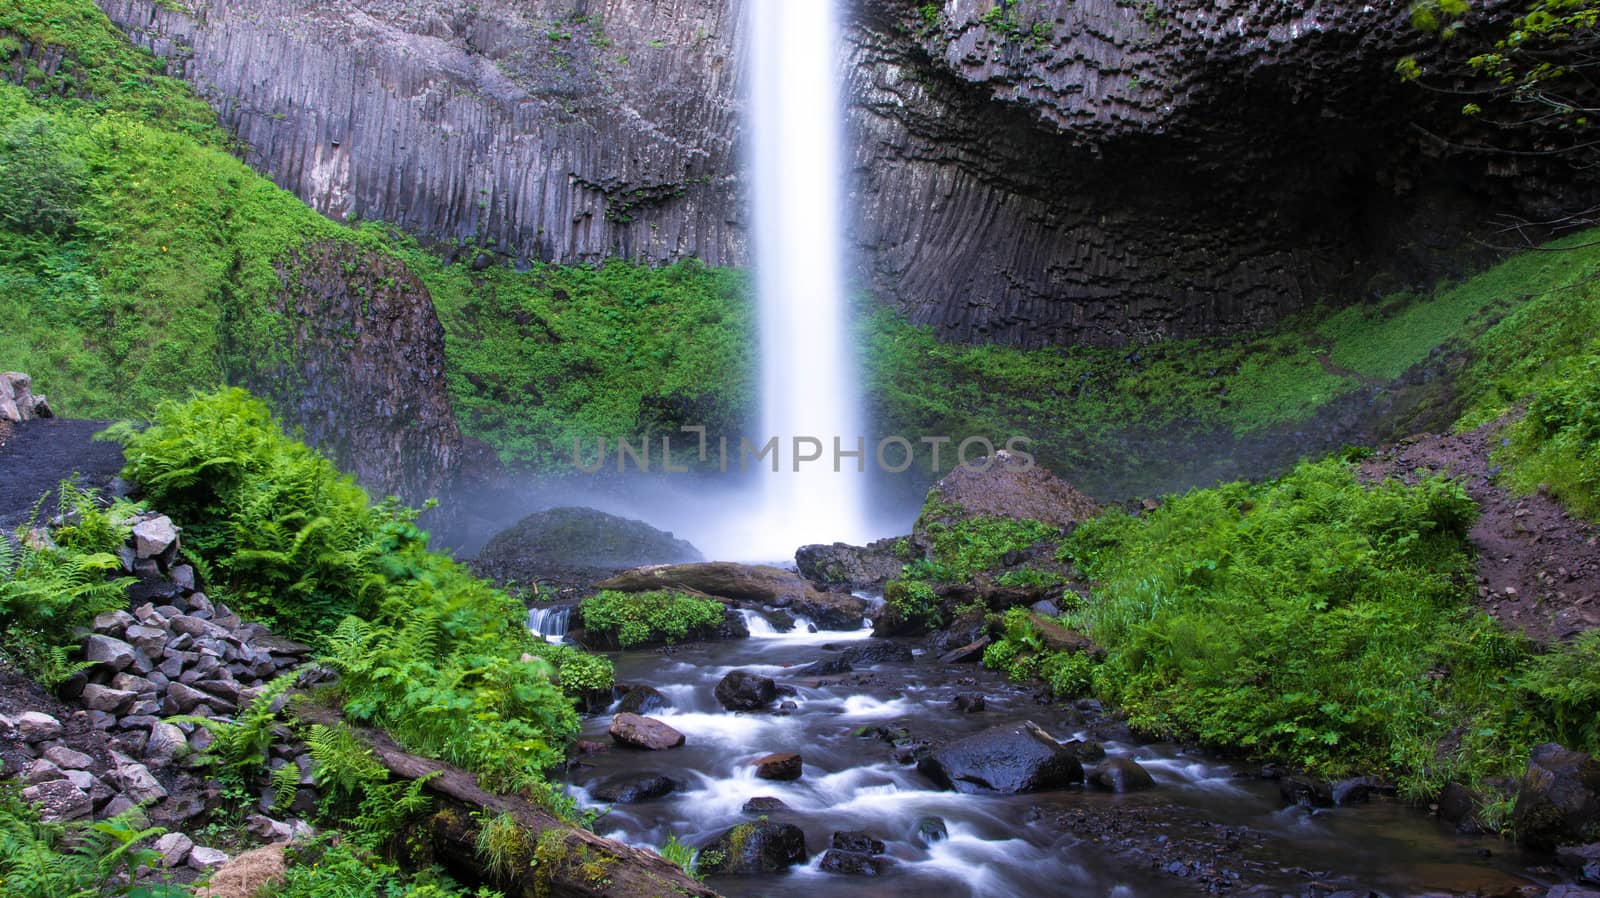 Situated in the Columbia River Gorge along Highway I-84